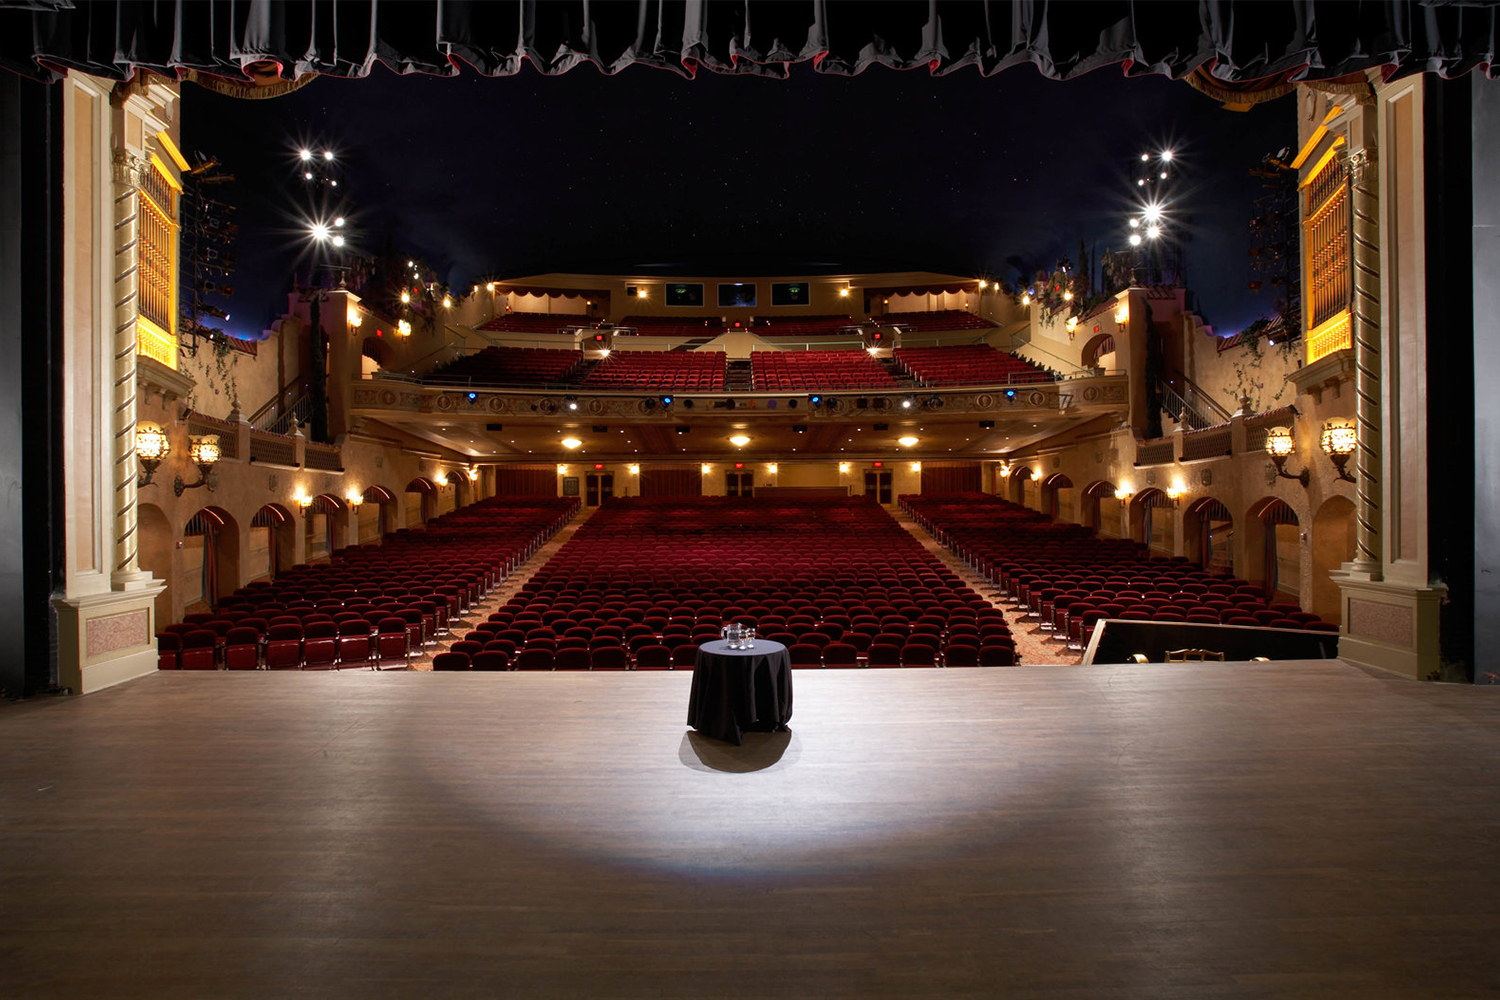 The view from the stage at the Plaza Theater in El Paso, Texas, one of the most haunted places in the state